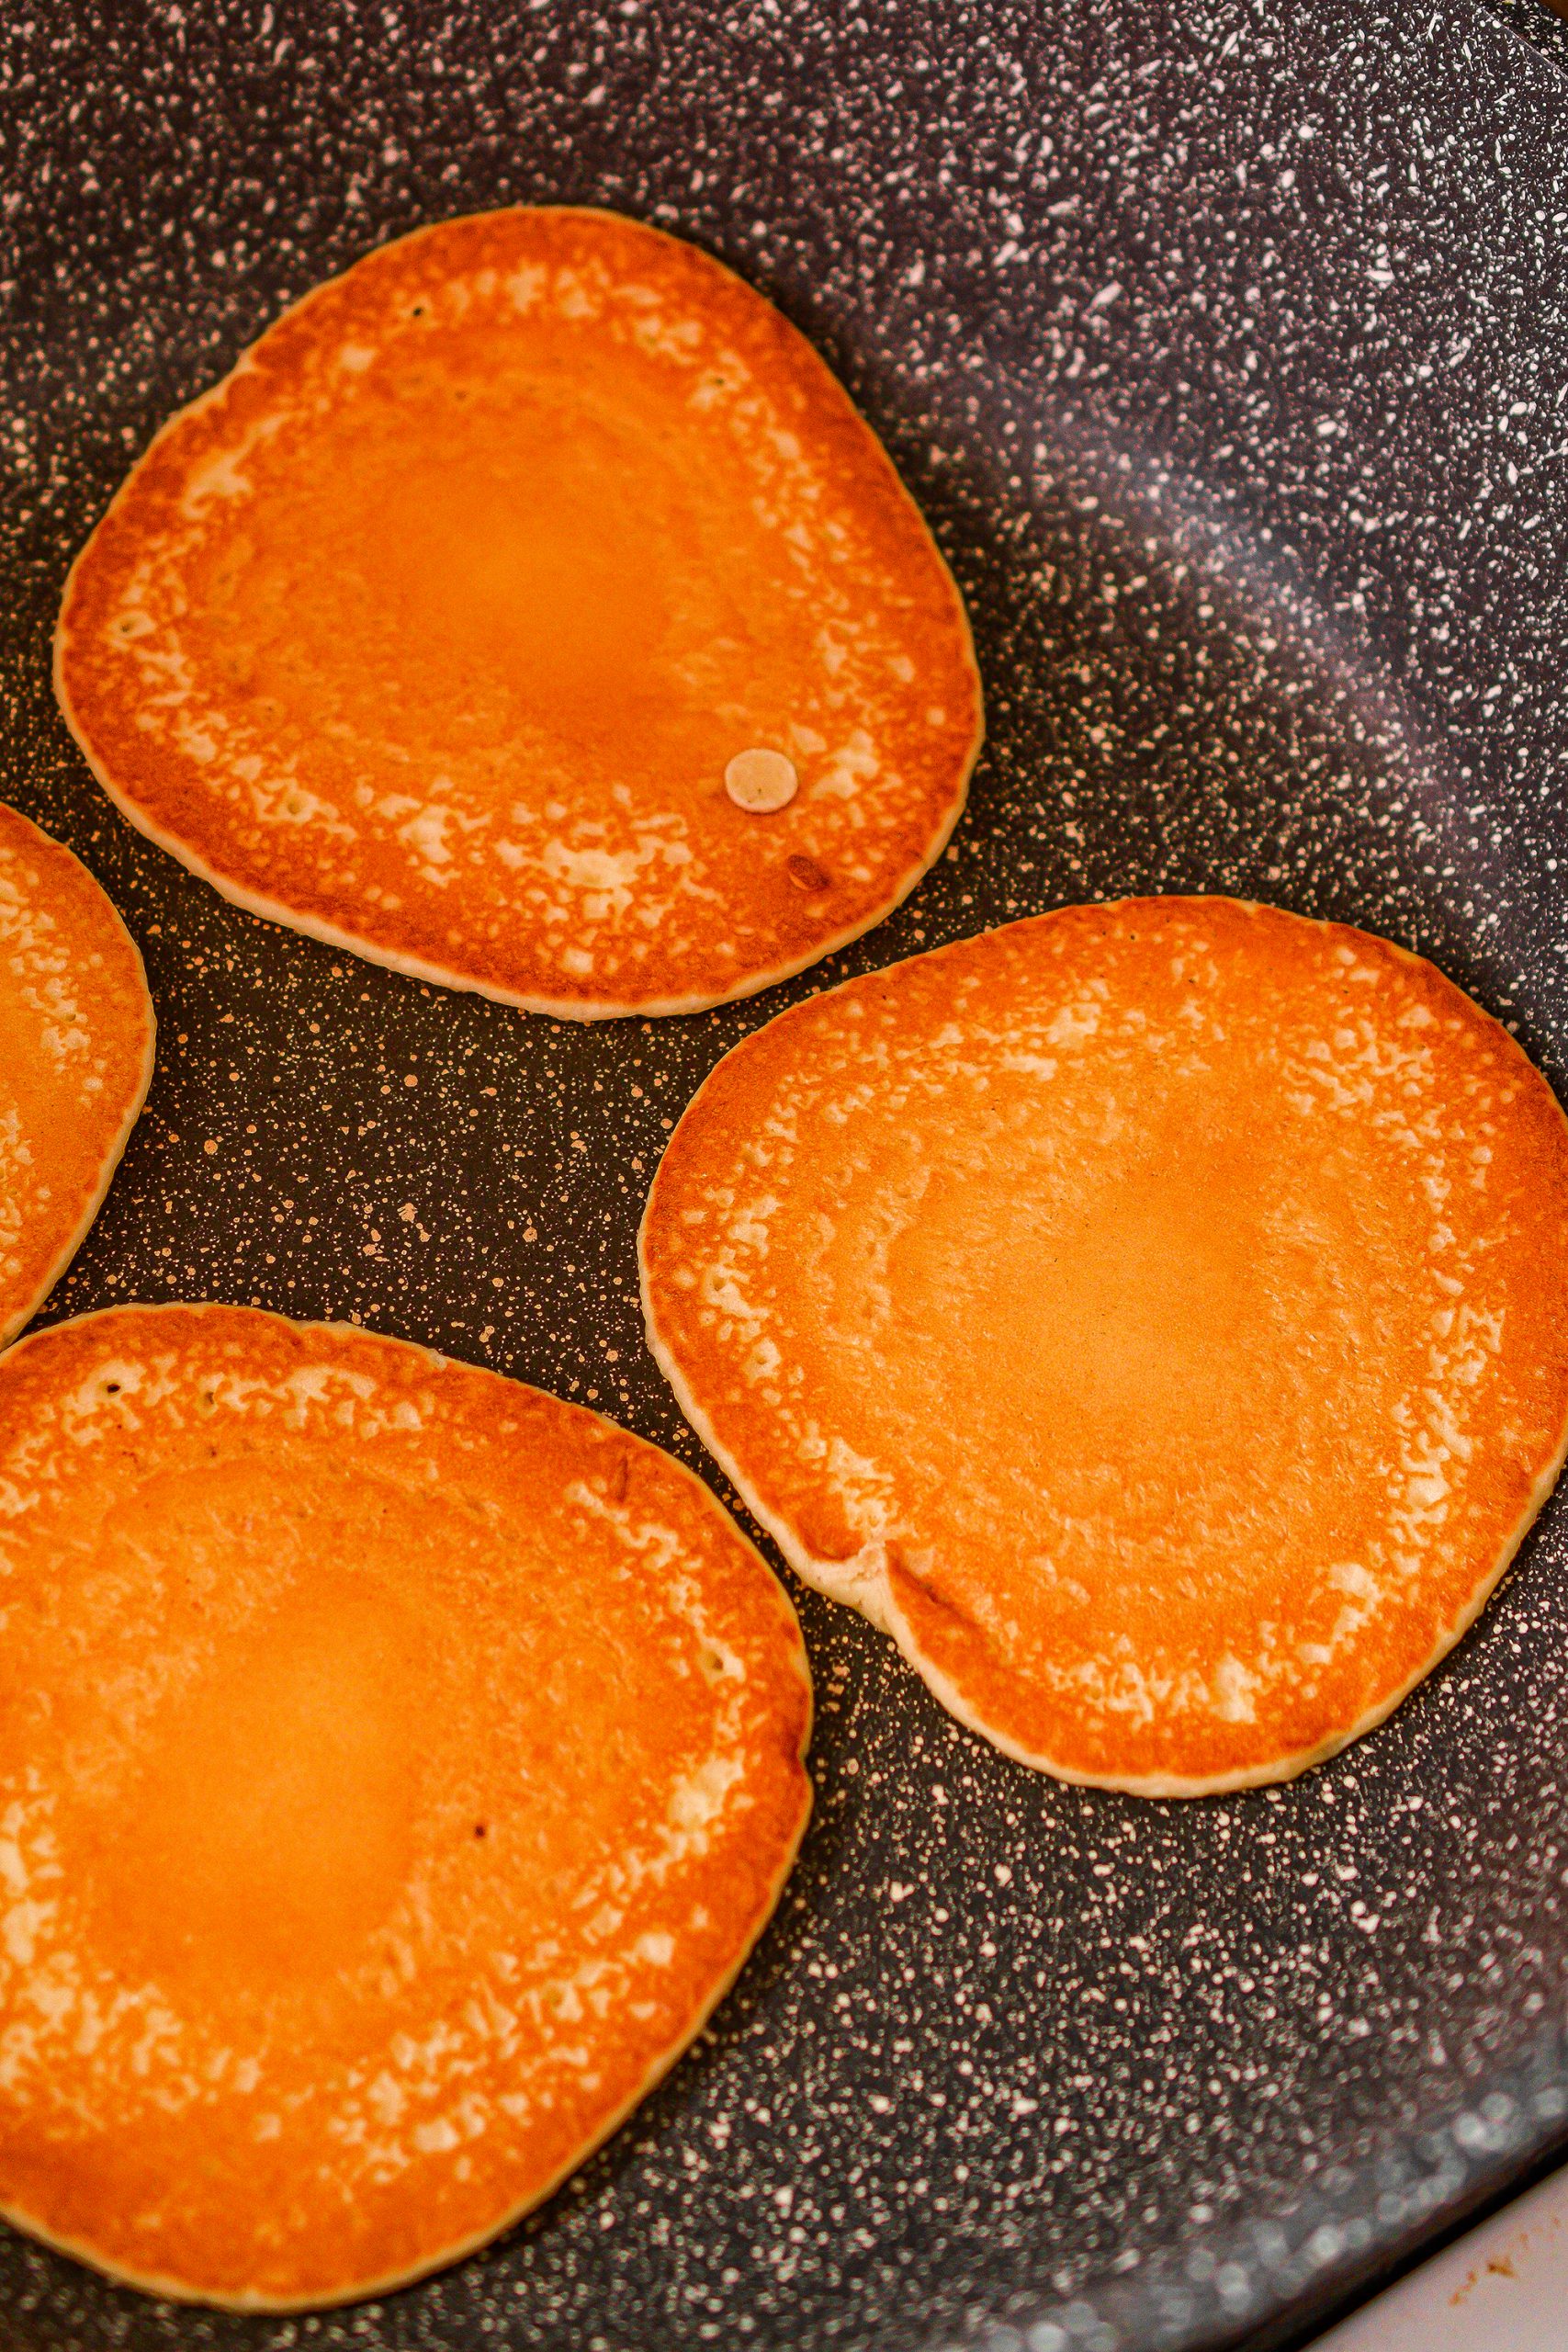 Prepare the pancake mix, and use it to make 8 smaller pancakes.